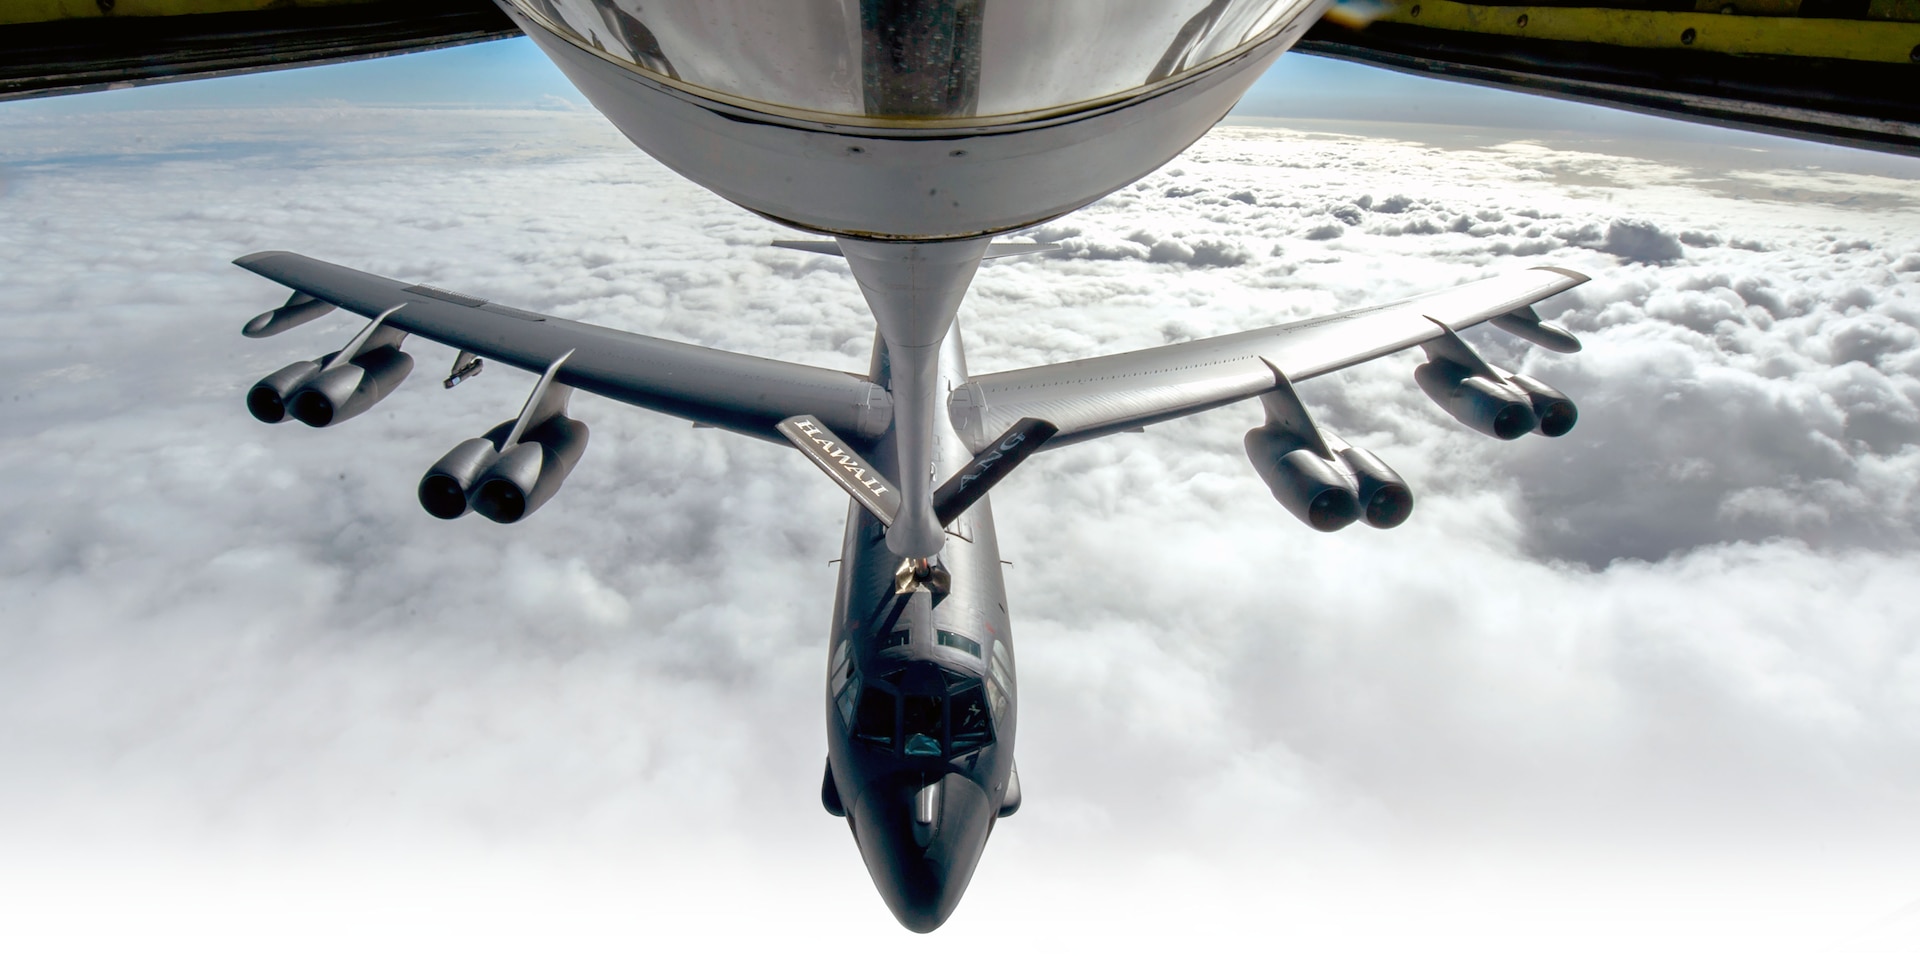 A B-52 Stratofortress is refueled in flight on April 2, 2014 over the Pacific Ocean near Joint Base Pearl Harbor-Hickam, Hawaii.